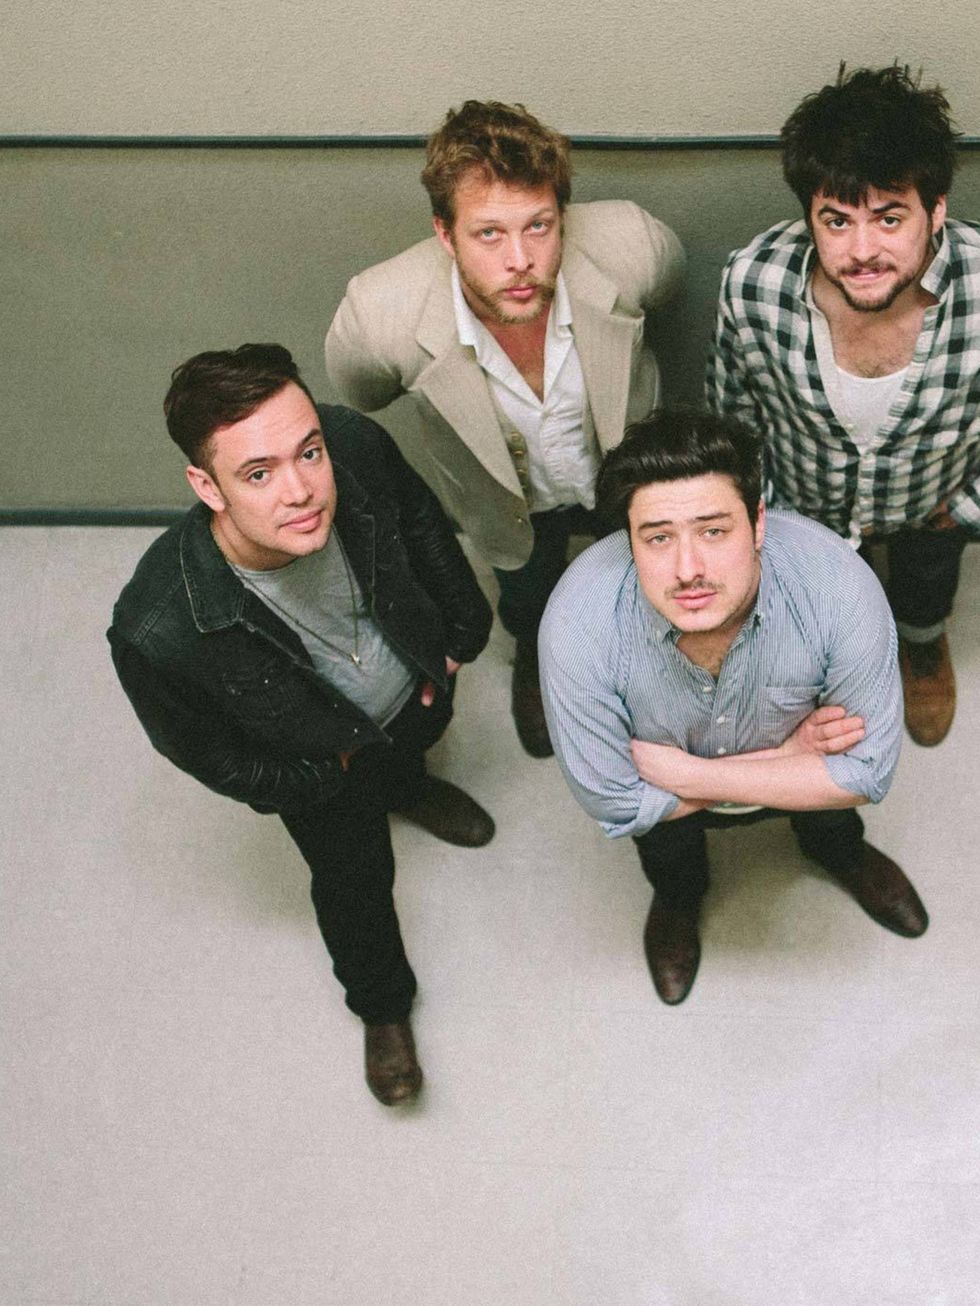 <p>Finally, it looks like summer is here. So get ready to join <em>The Summer Stampede, </em>at the Queen Elizabeth Olympic Park. Mumford & Sons are headlining the event and will be supported by an array of handpicked artists such as <a href="http://www.e